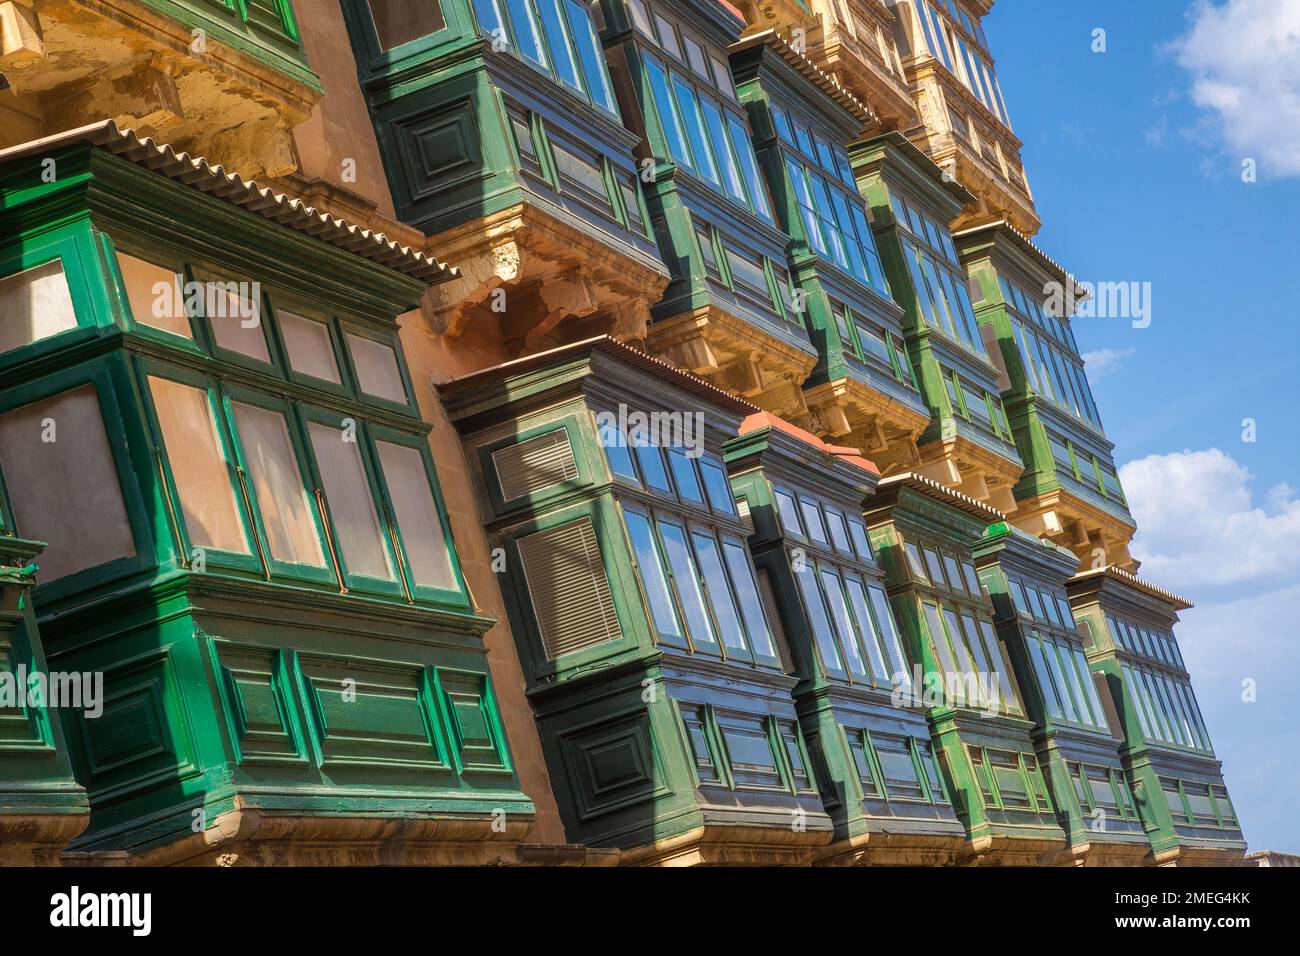 Valletta, Malta - Typical Maltese green balconies on ancient house at Valletta with blue sky and clouds Stock Photo